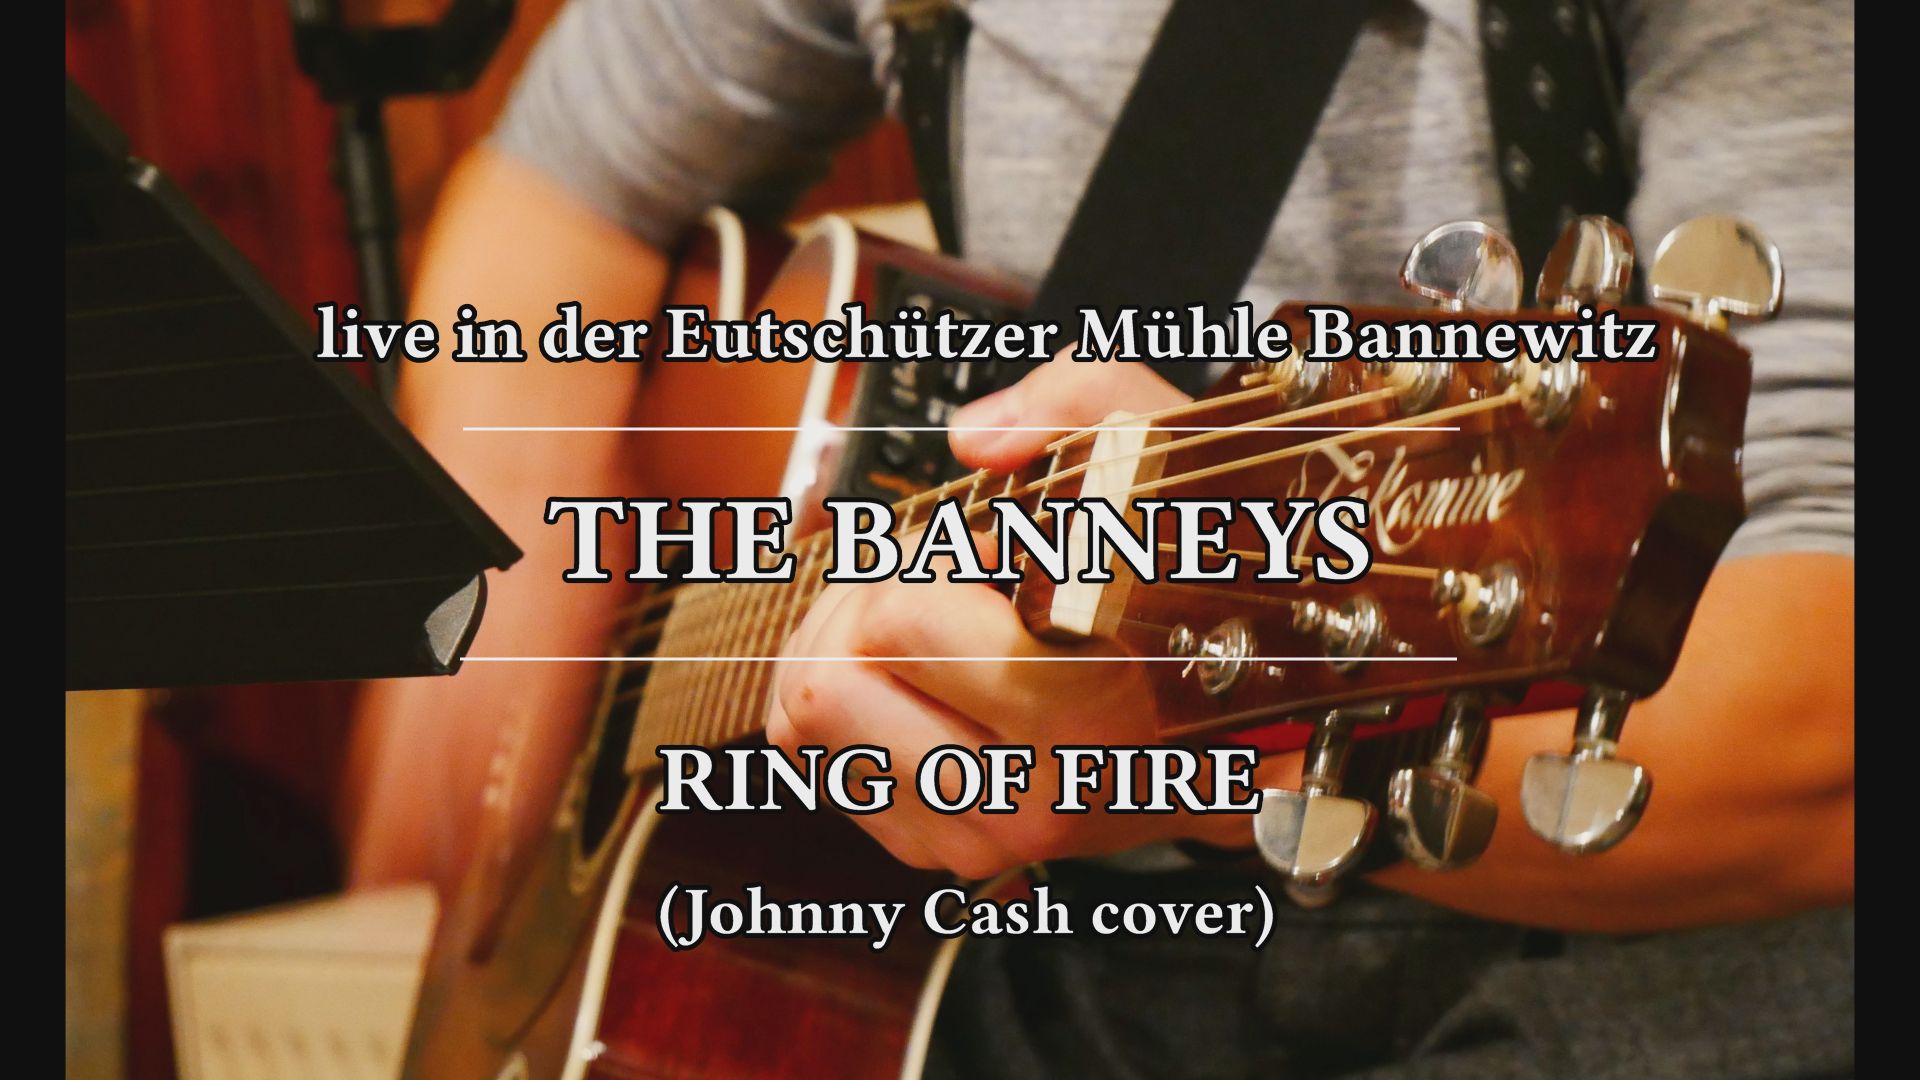 The Banneys - Ring of fire (Cover)